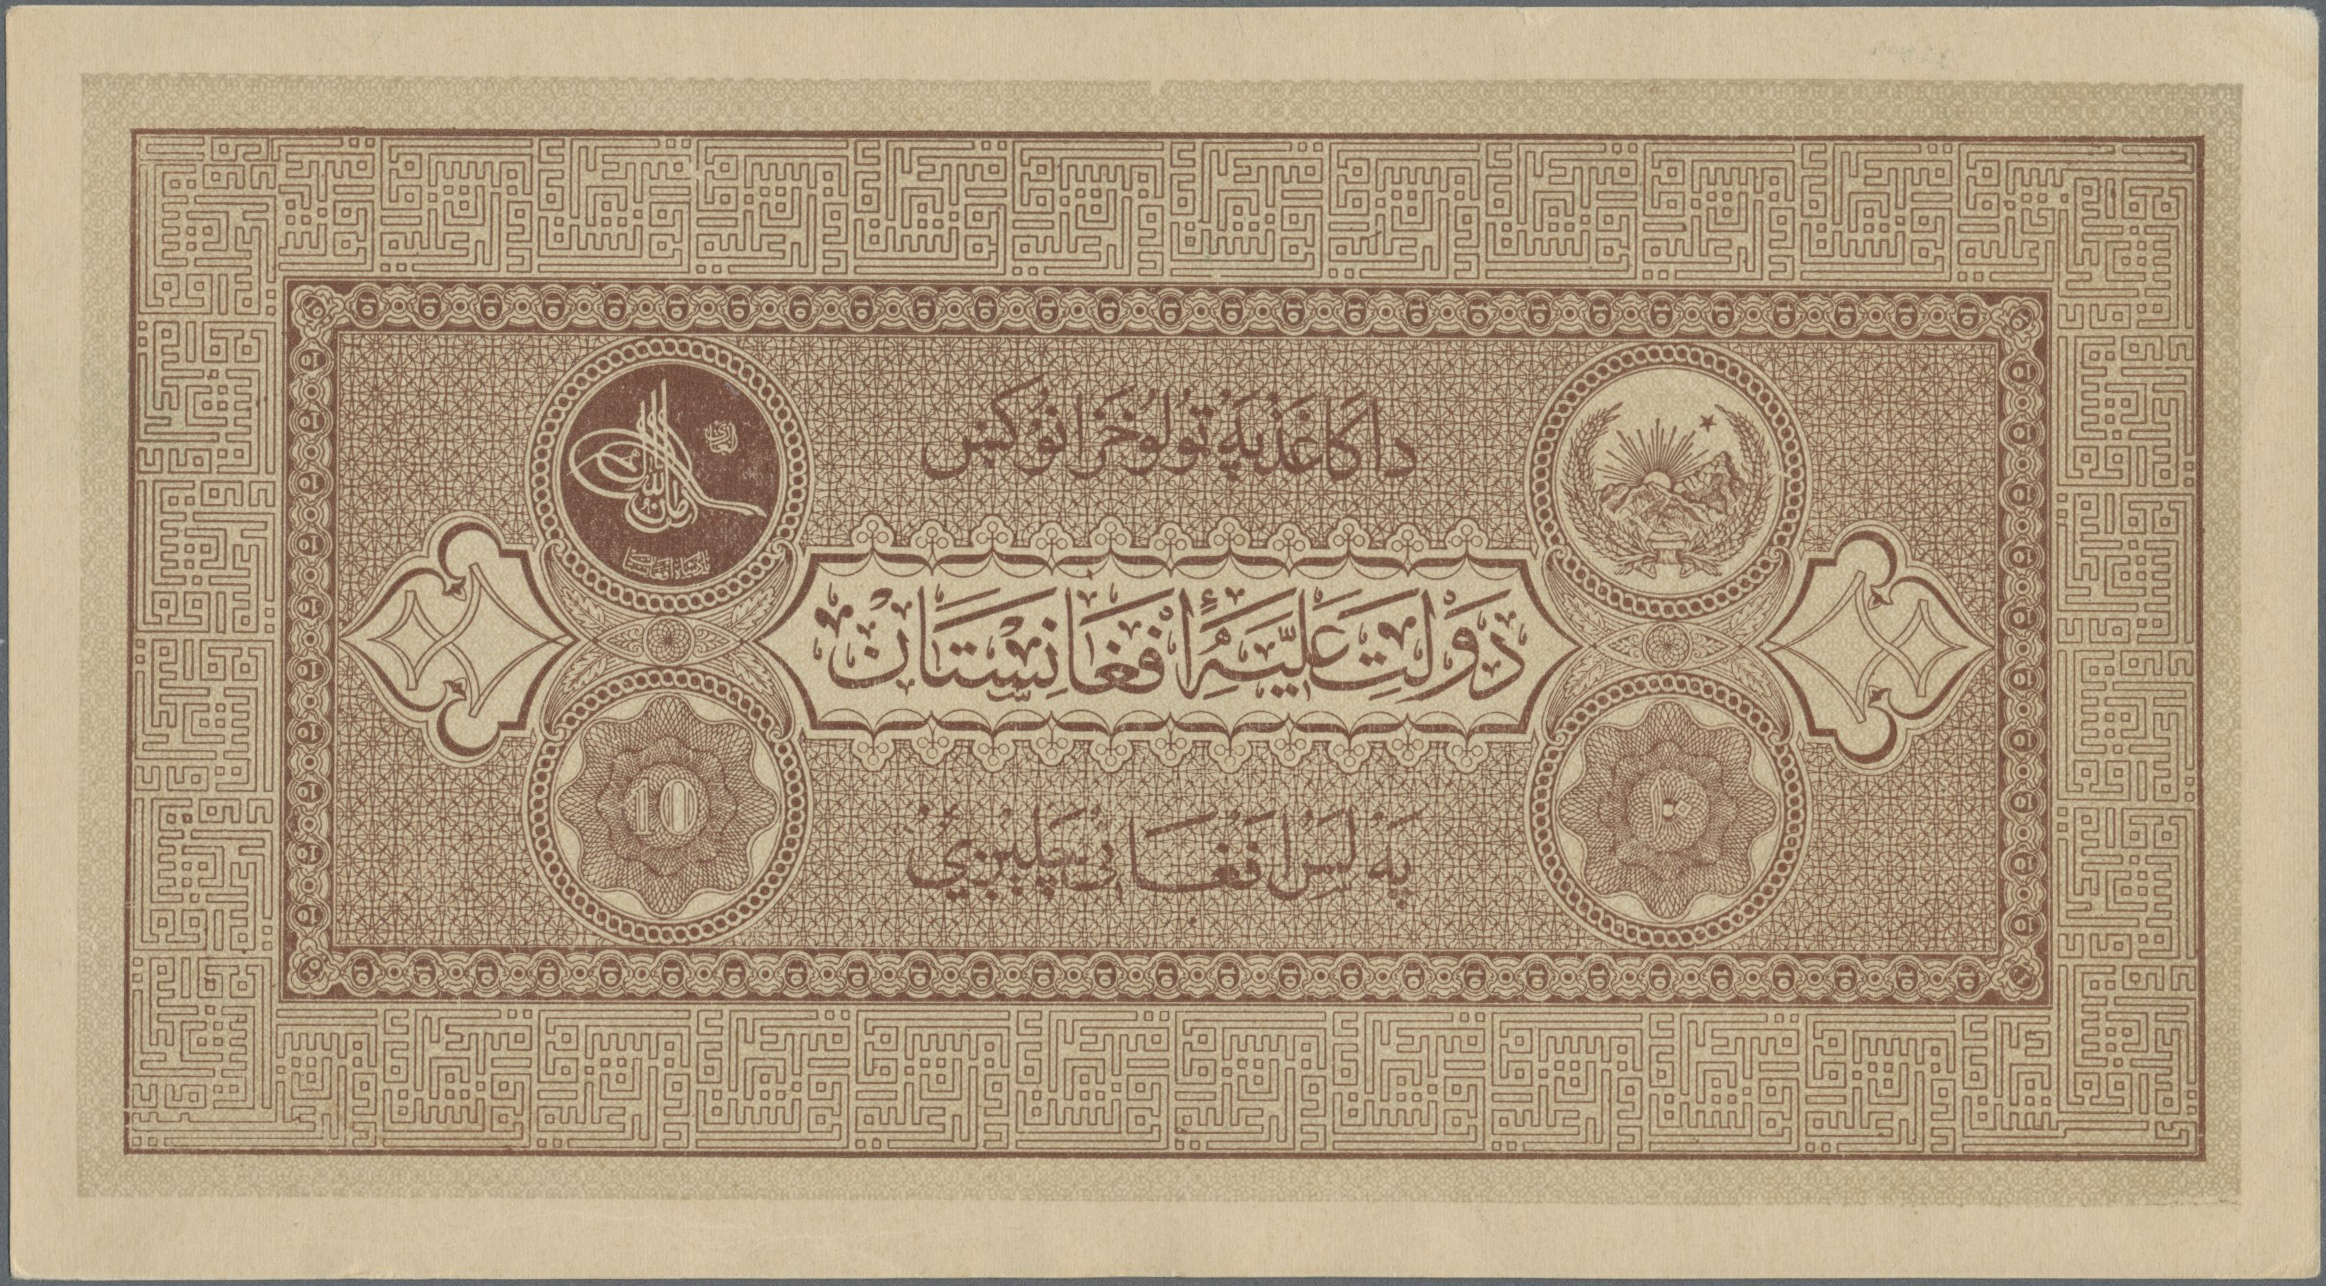 Lot 00001 - Afghanistan | Banknoten  -  Auktionshaus Christoph Gärtner GmbH & Co. KG 55th AUCTION - Day 1